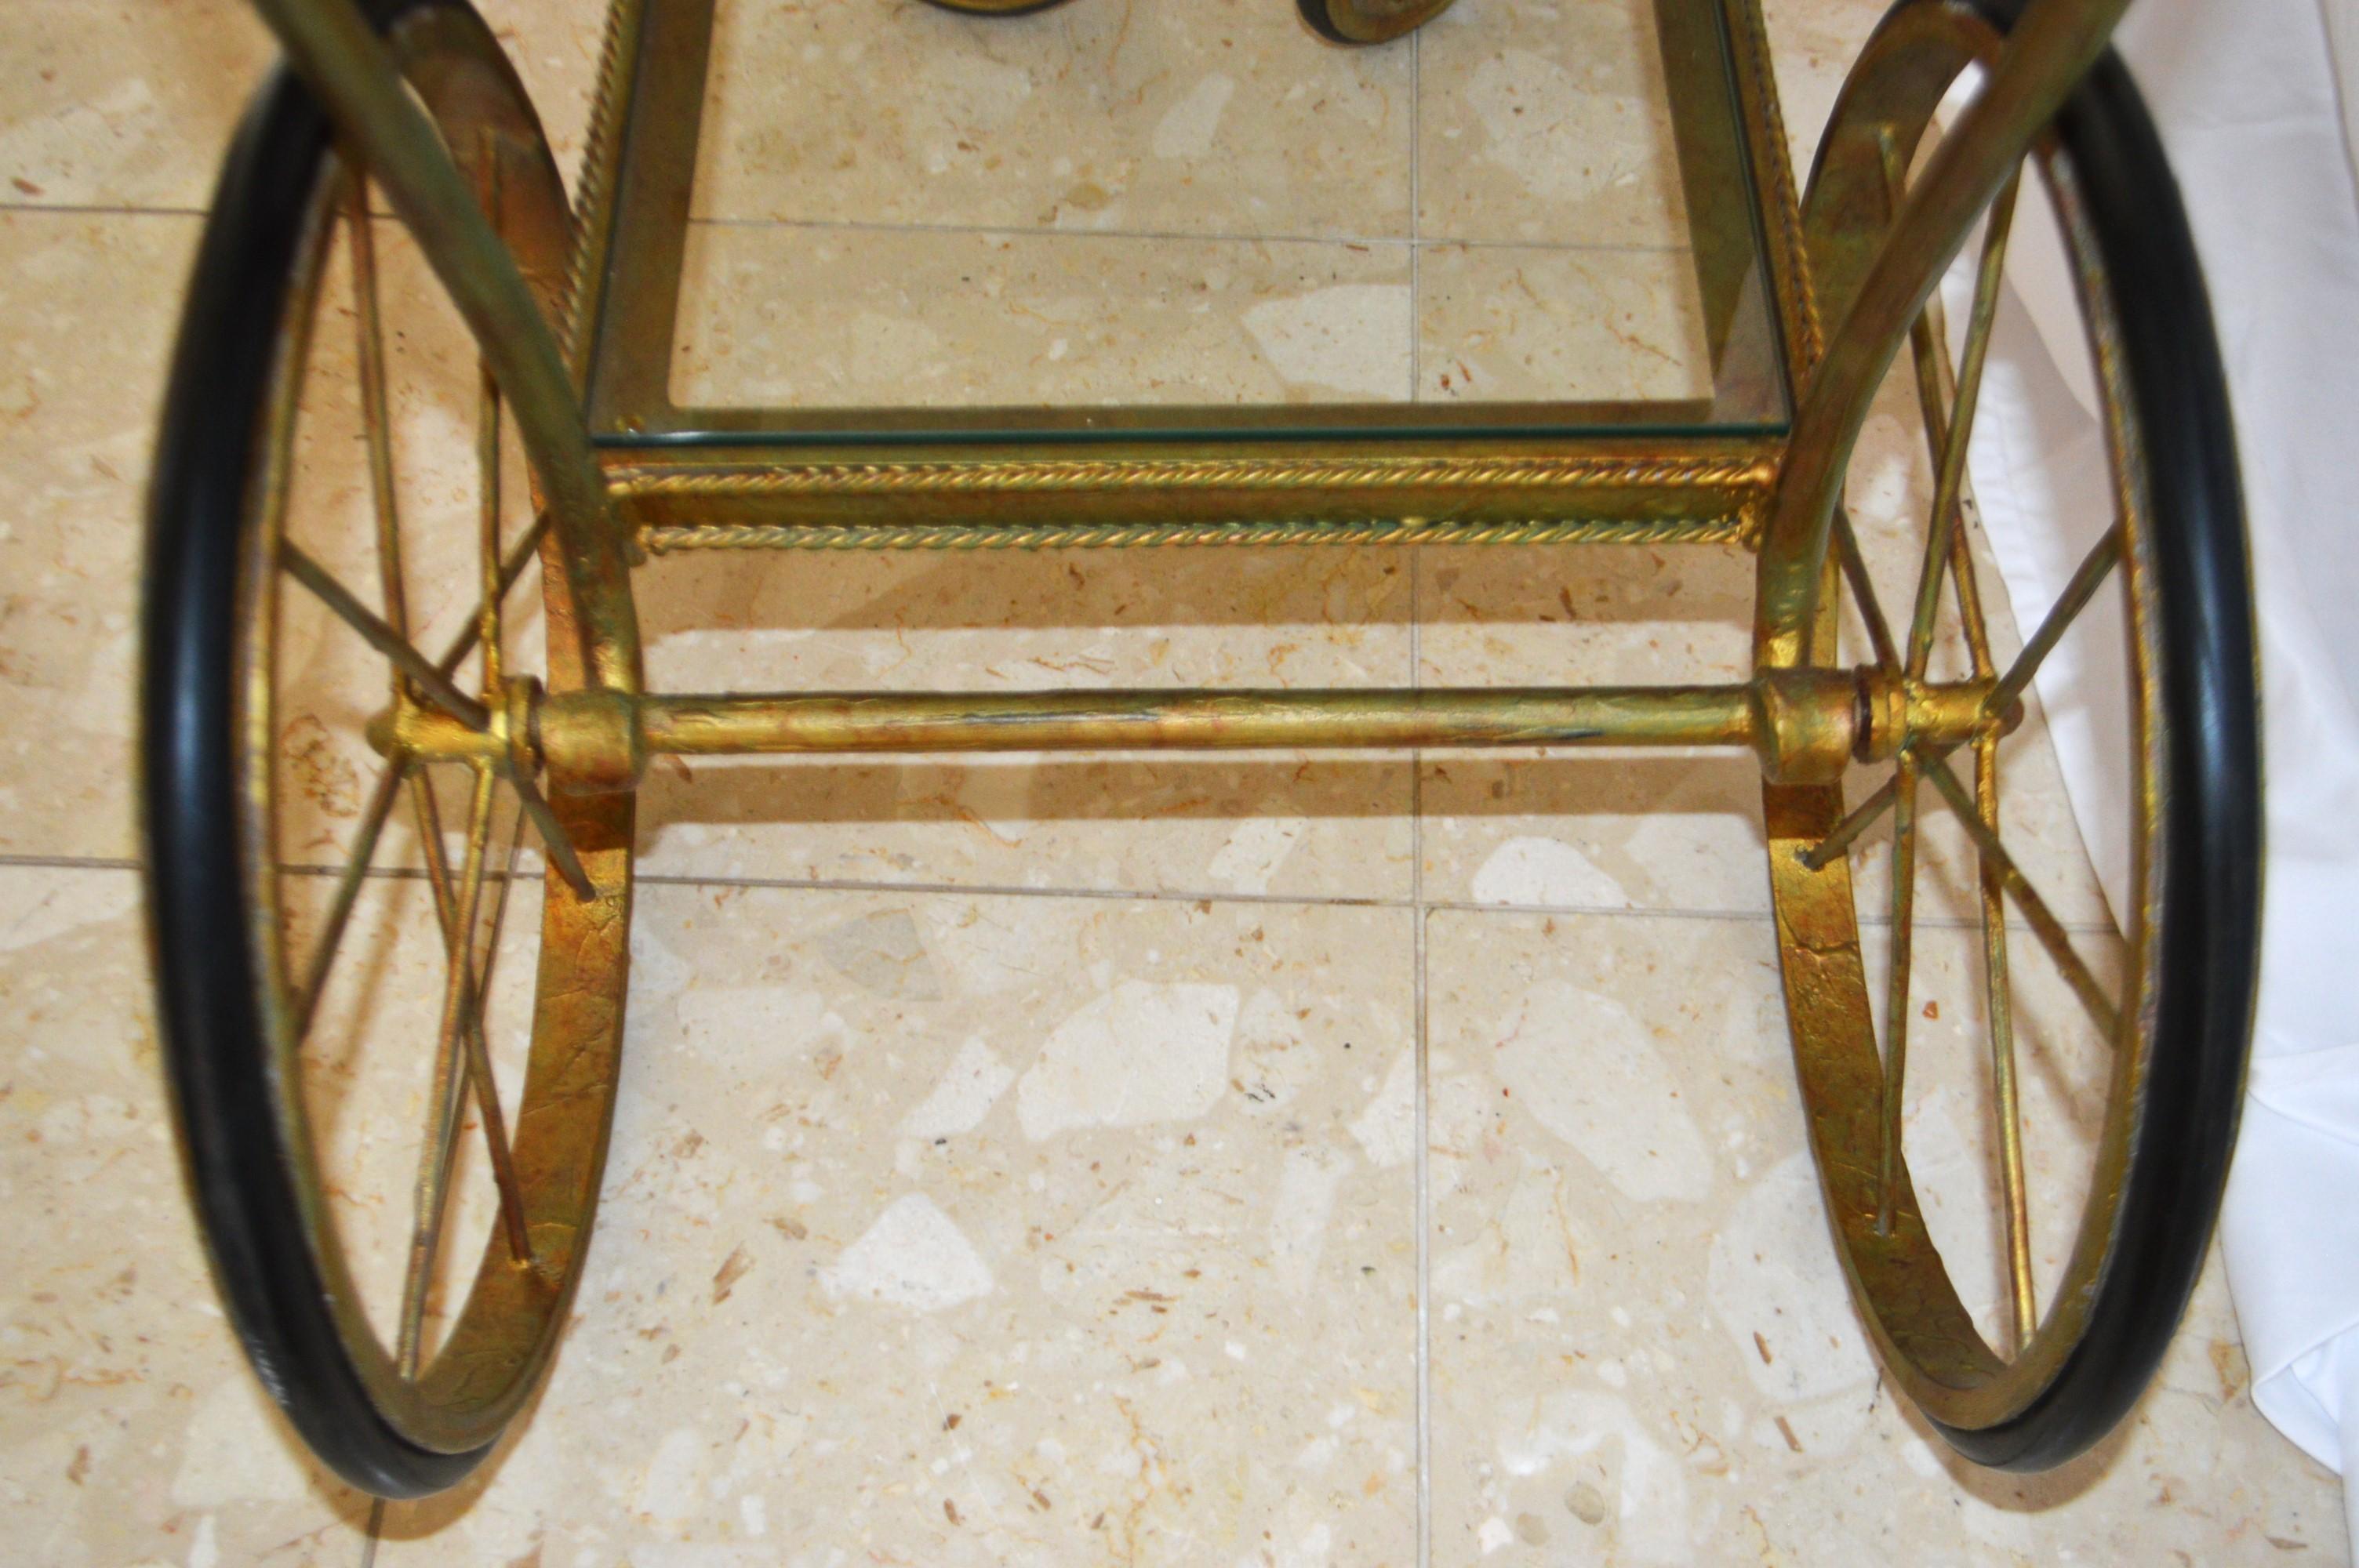 French Gilded Wrought Iron Bar Cart on wheels with two levels with glass tops.